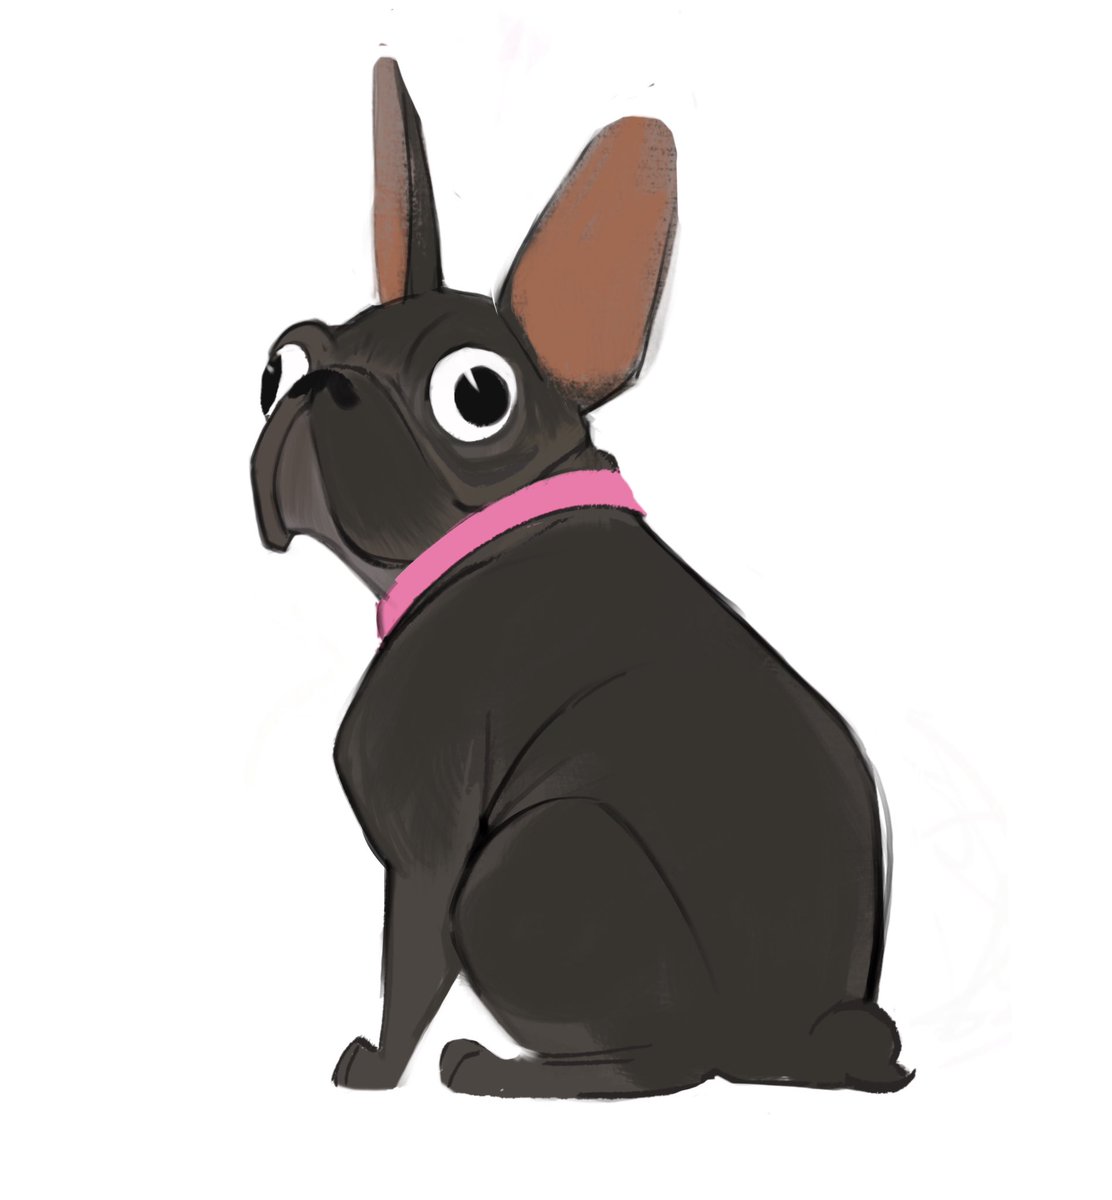 Over break, we had the pleasure of babysitting this iconic Frenchie named Lilly! I had to draw her 💖 she is the sweetest little froggie around😍 #characterdesign #frenchie #frenchielove #procreatedoodle #visdev #doggo #pup